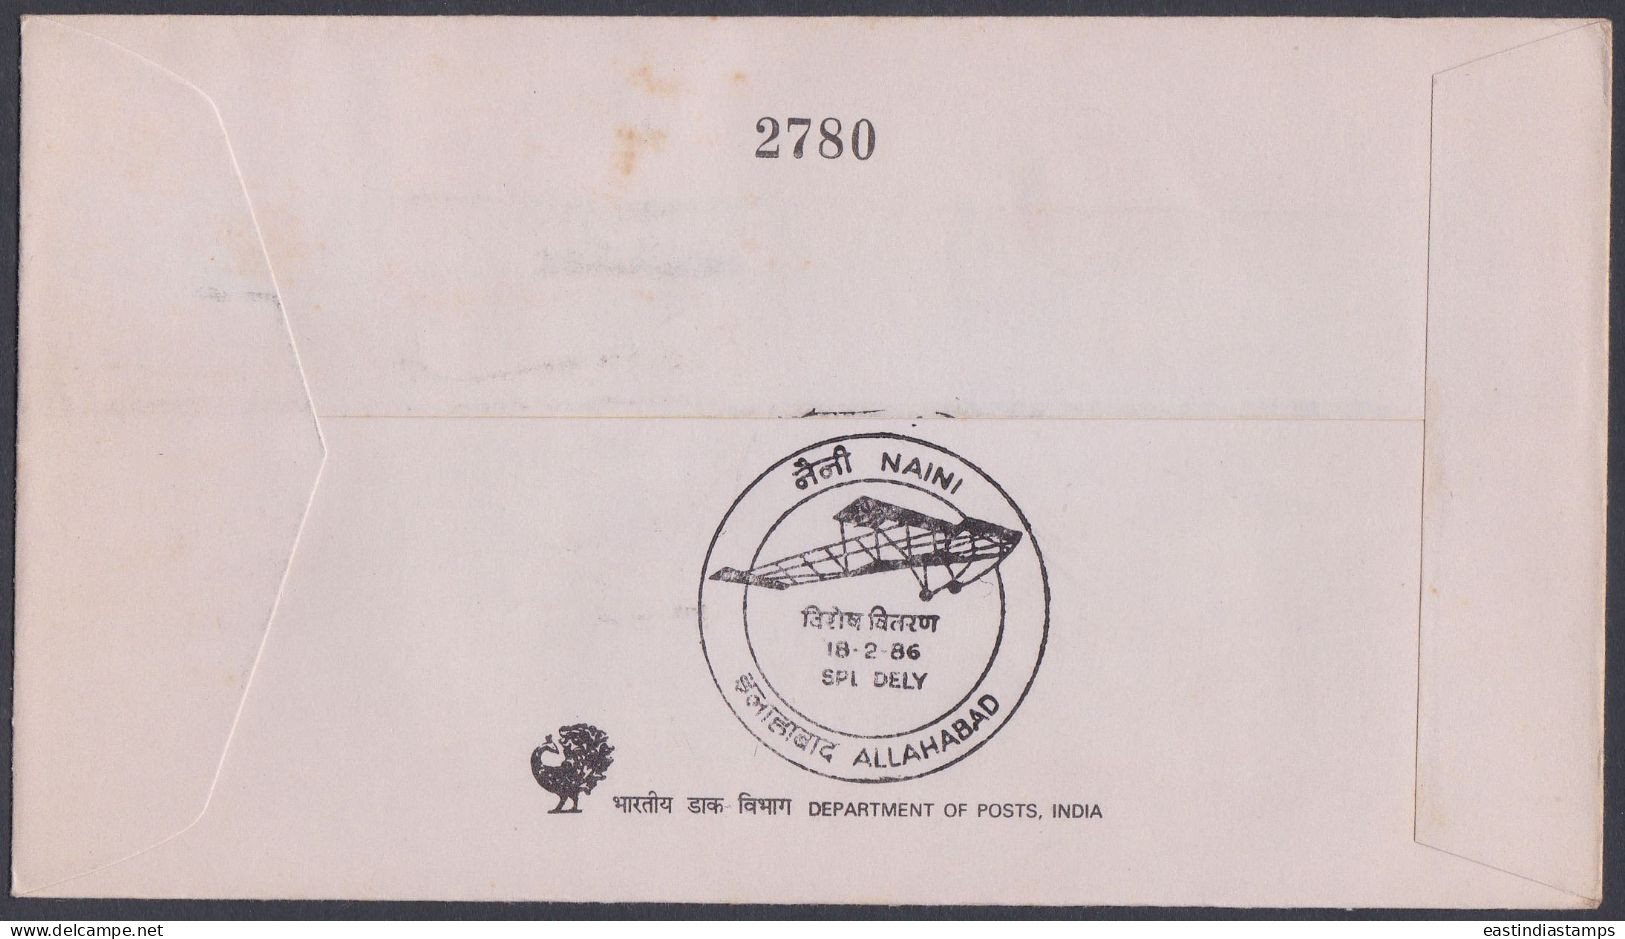 Inde India 1986 FDC Aerial Post, Aircraft, Aeroplane, Airplane, Airmail, Biplane, First Day Cover - Cartas & Documentos